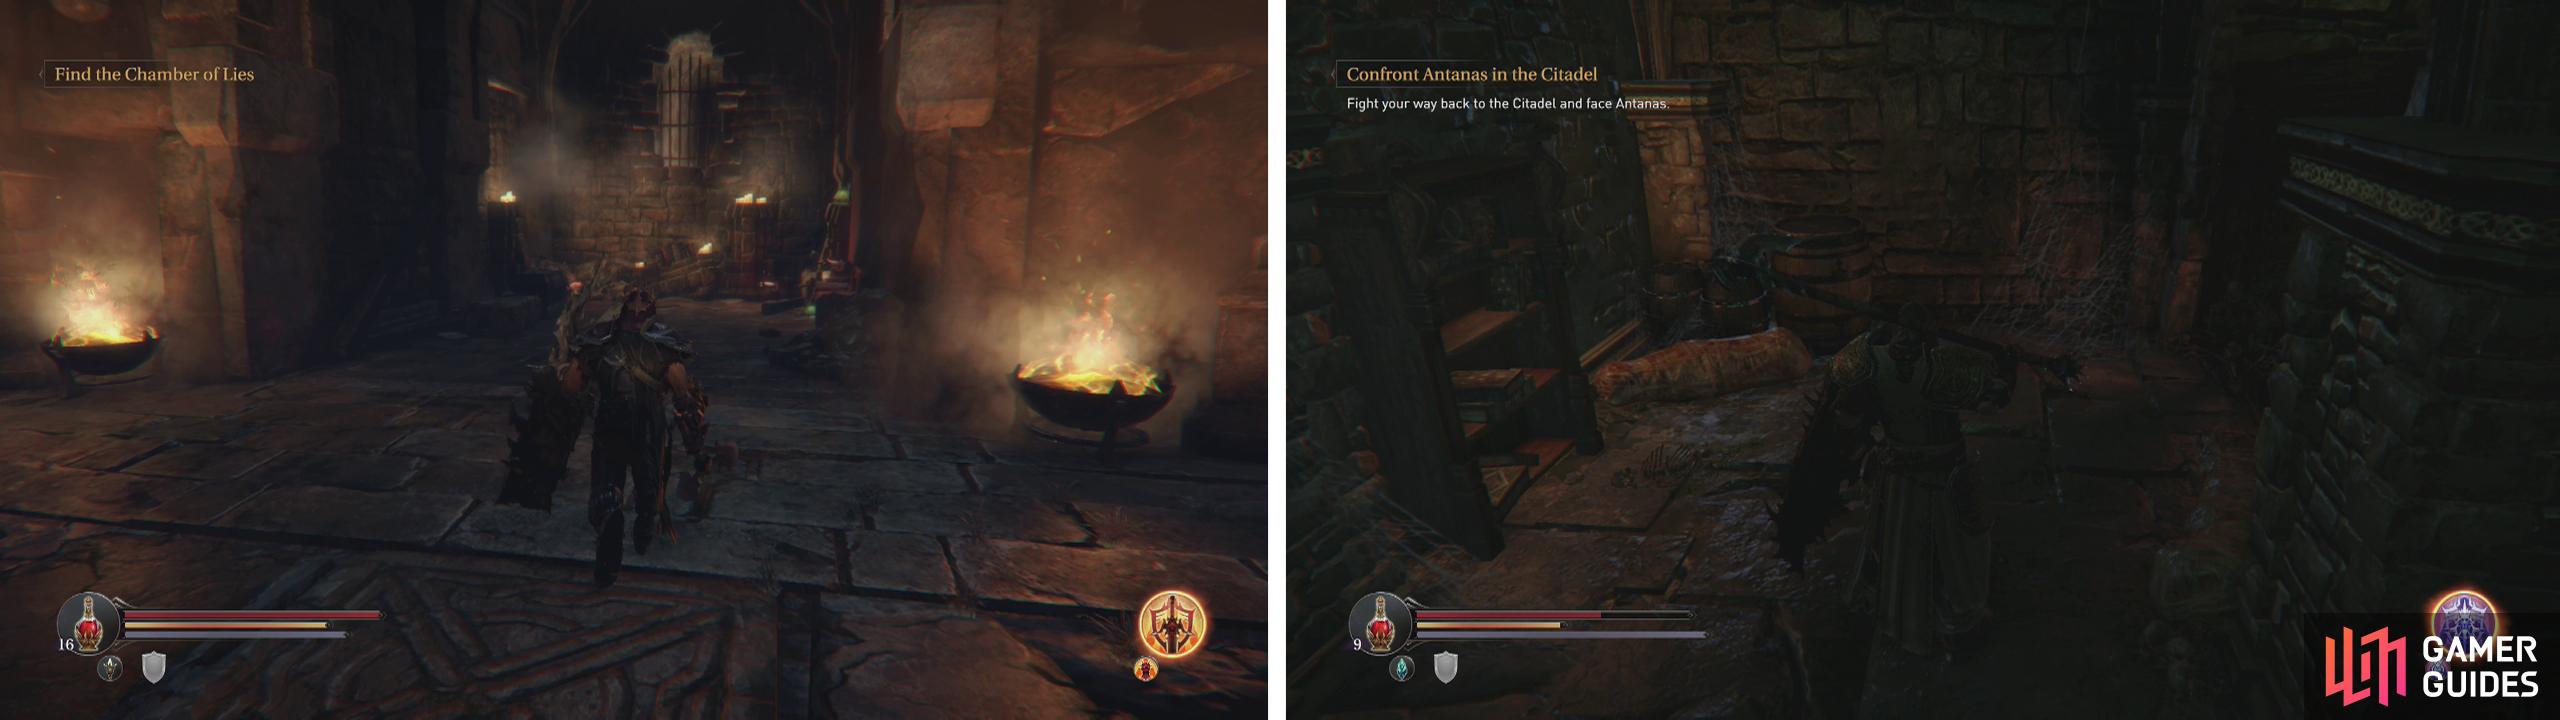 After defeating the Beast, return to the Champion's arena to find a chest and several Audio Notes (left). There is a hidden wall in the Cellar area containing an Empty Bottle (right).